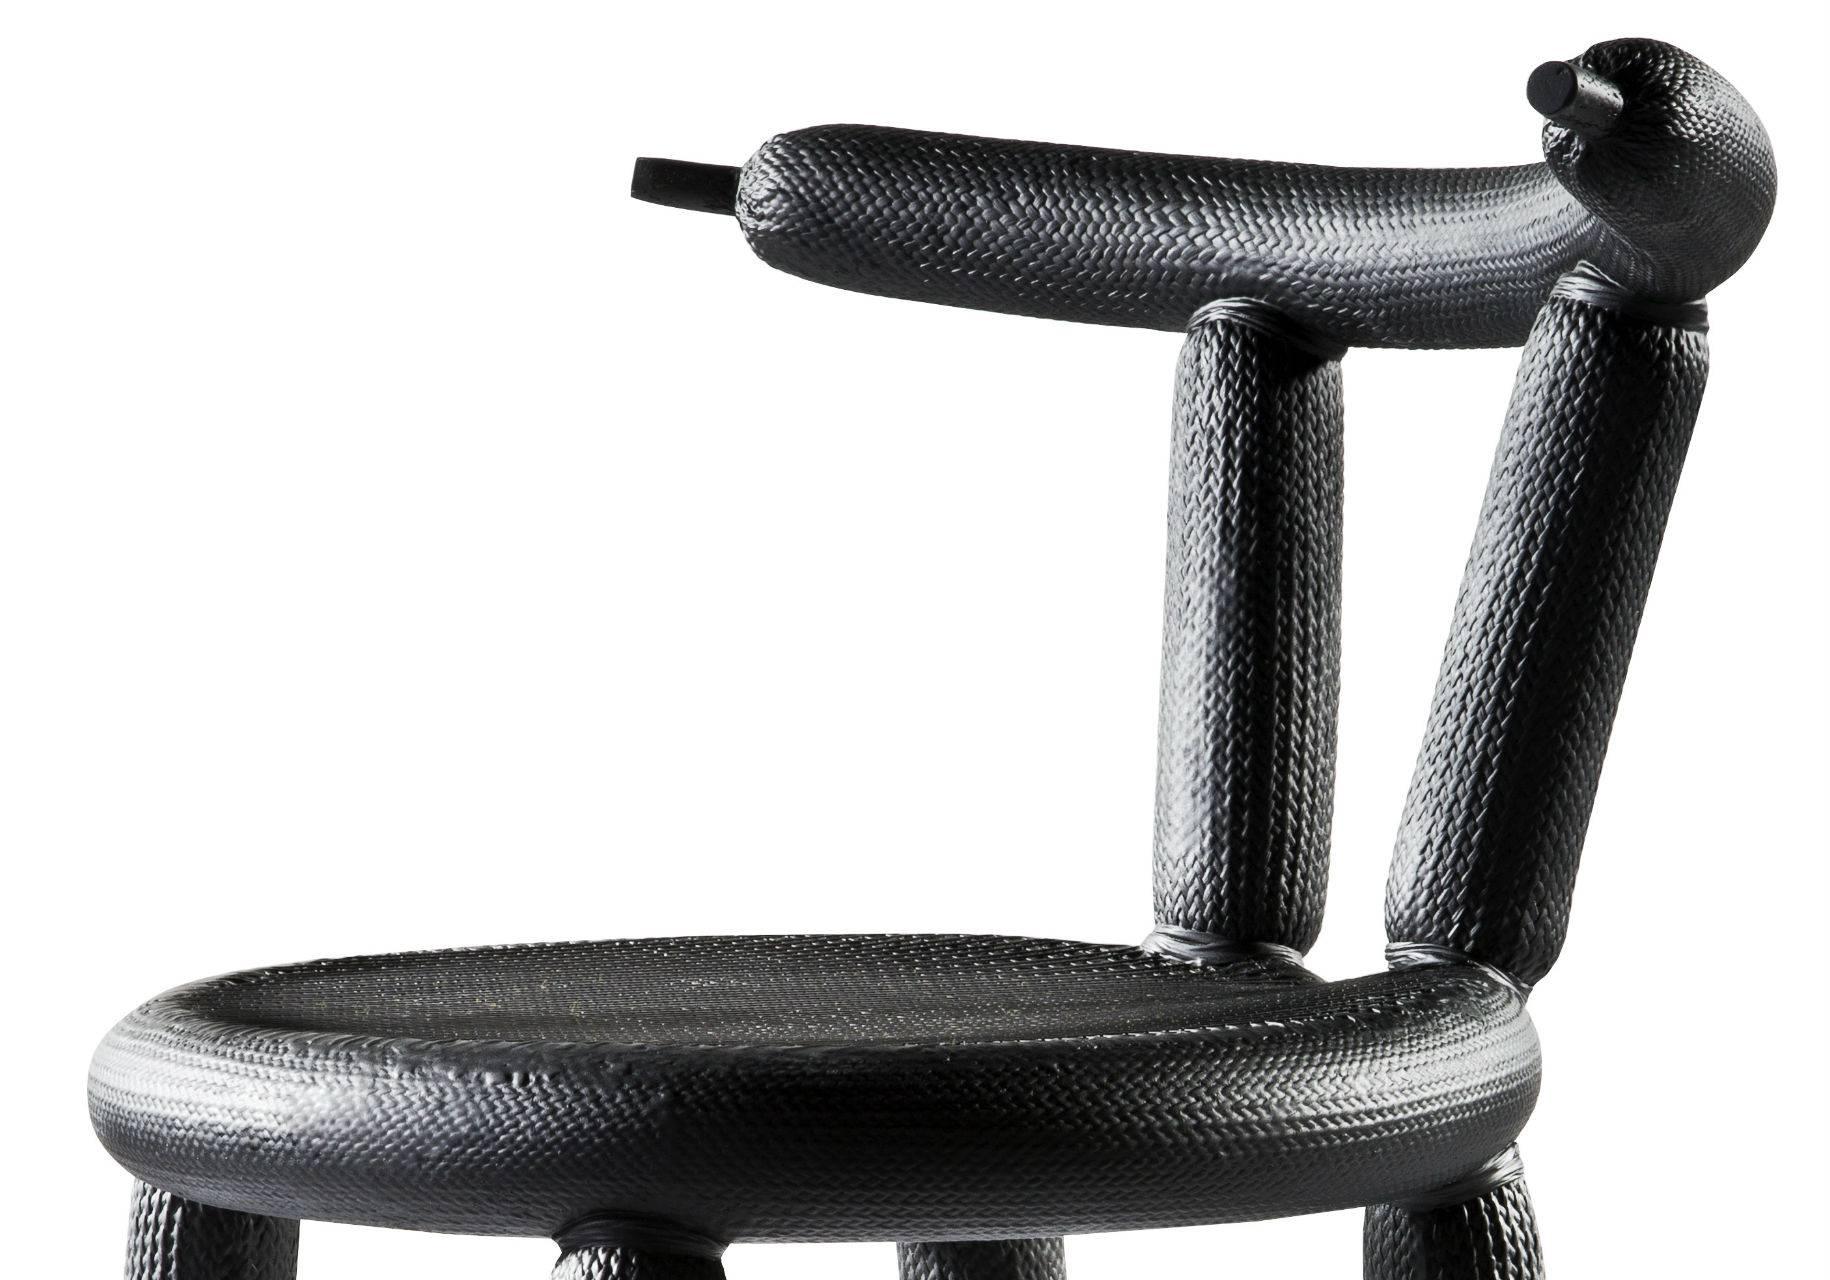 Black Carbon Balloon Chair by Marcel Wanders In Excellent Condition For Sale In Munich, Bavaria